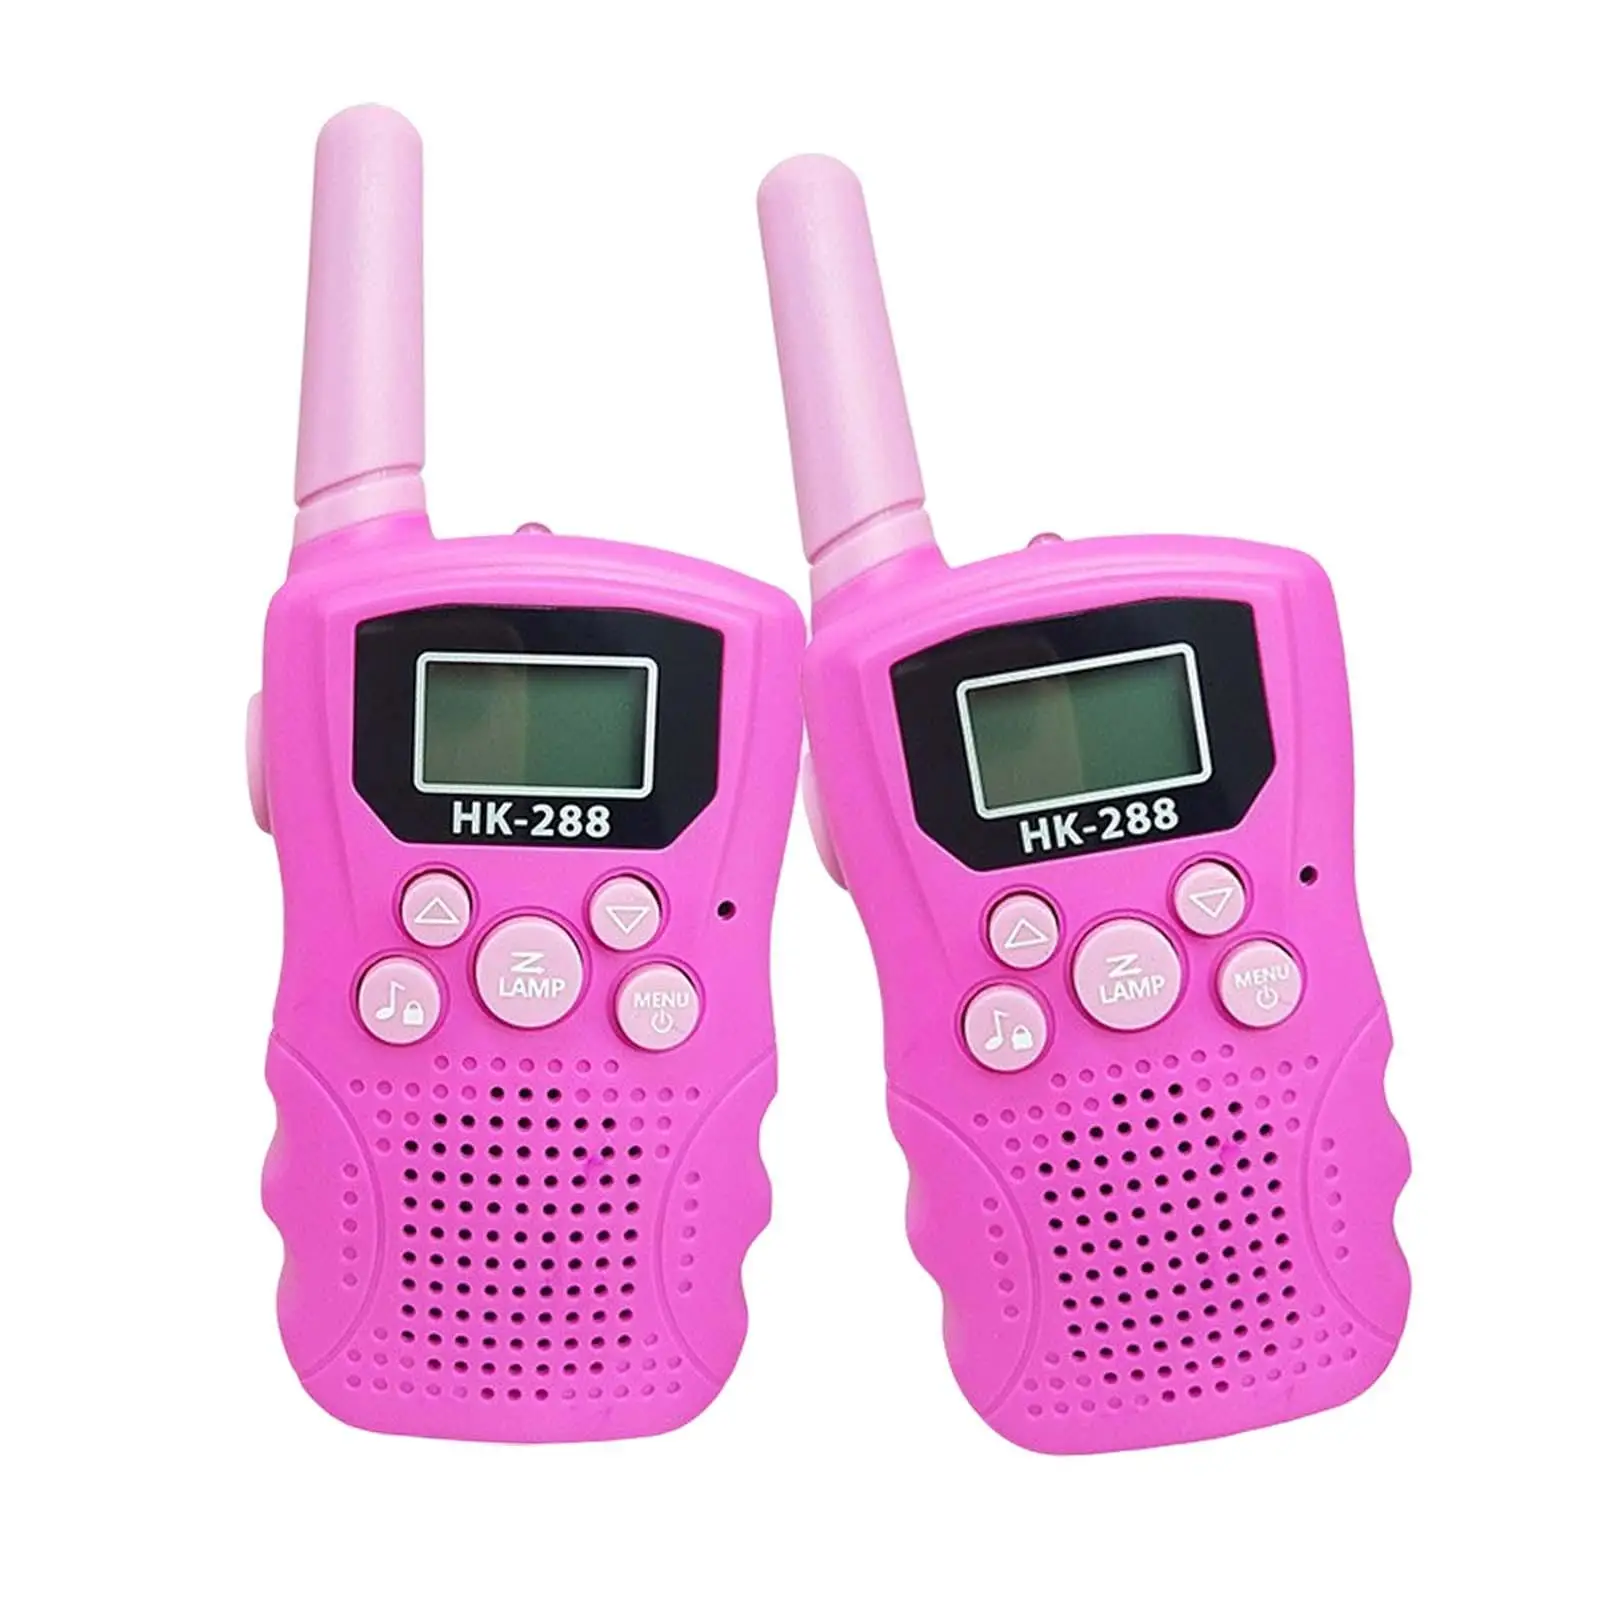 1Pair Kids Walkie Talkies Small with Flashlight Walky Talky Toy for 3-12 Years Old Family Games Teens Hiking Indoor Toys Outdoor